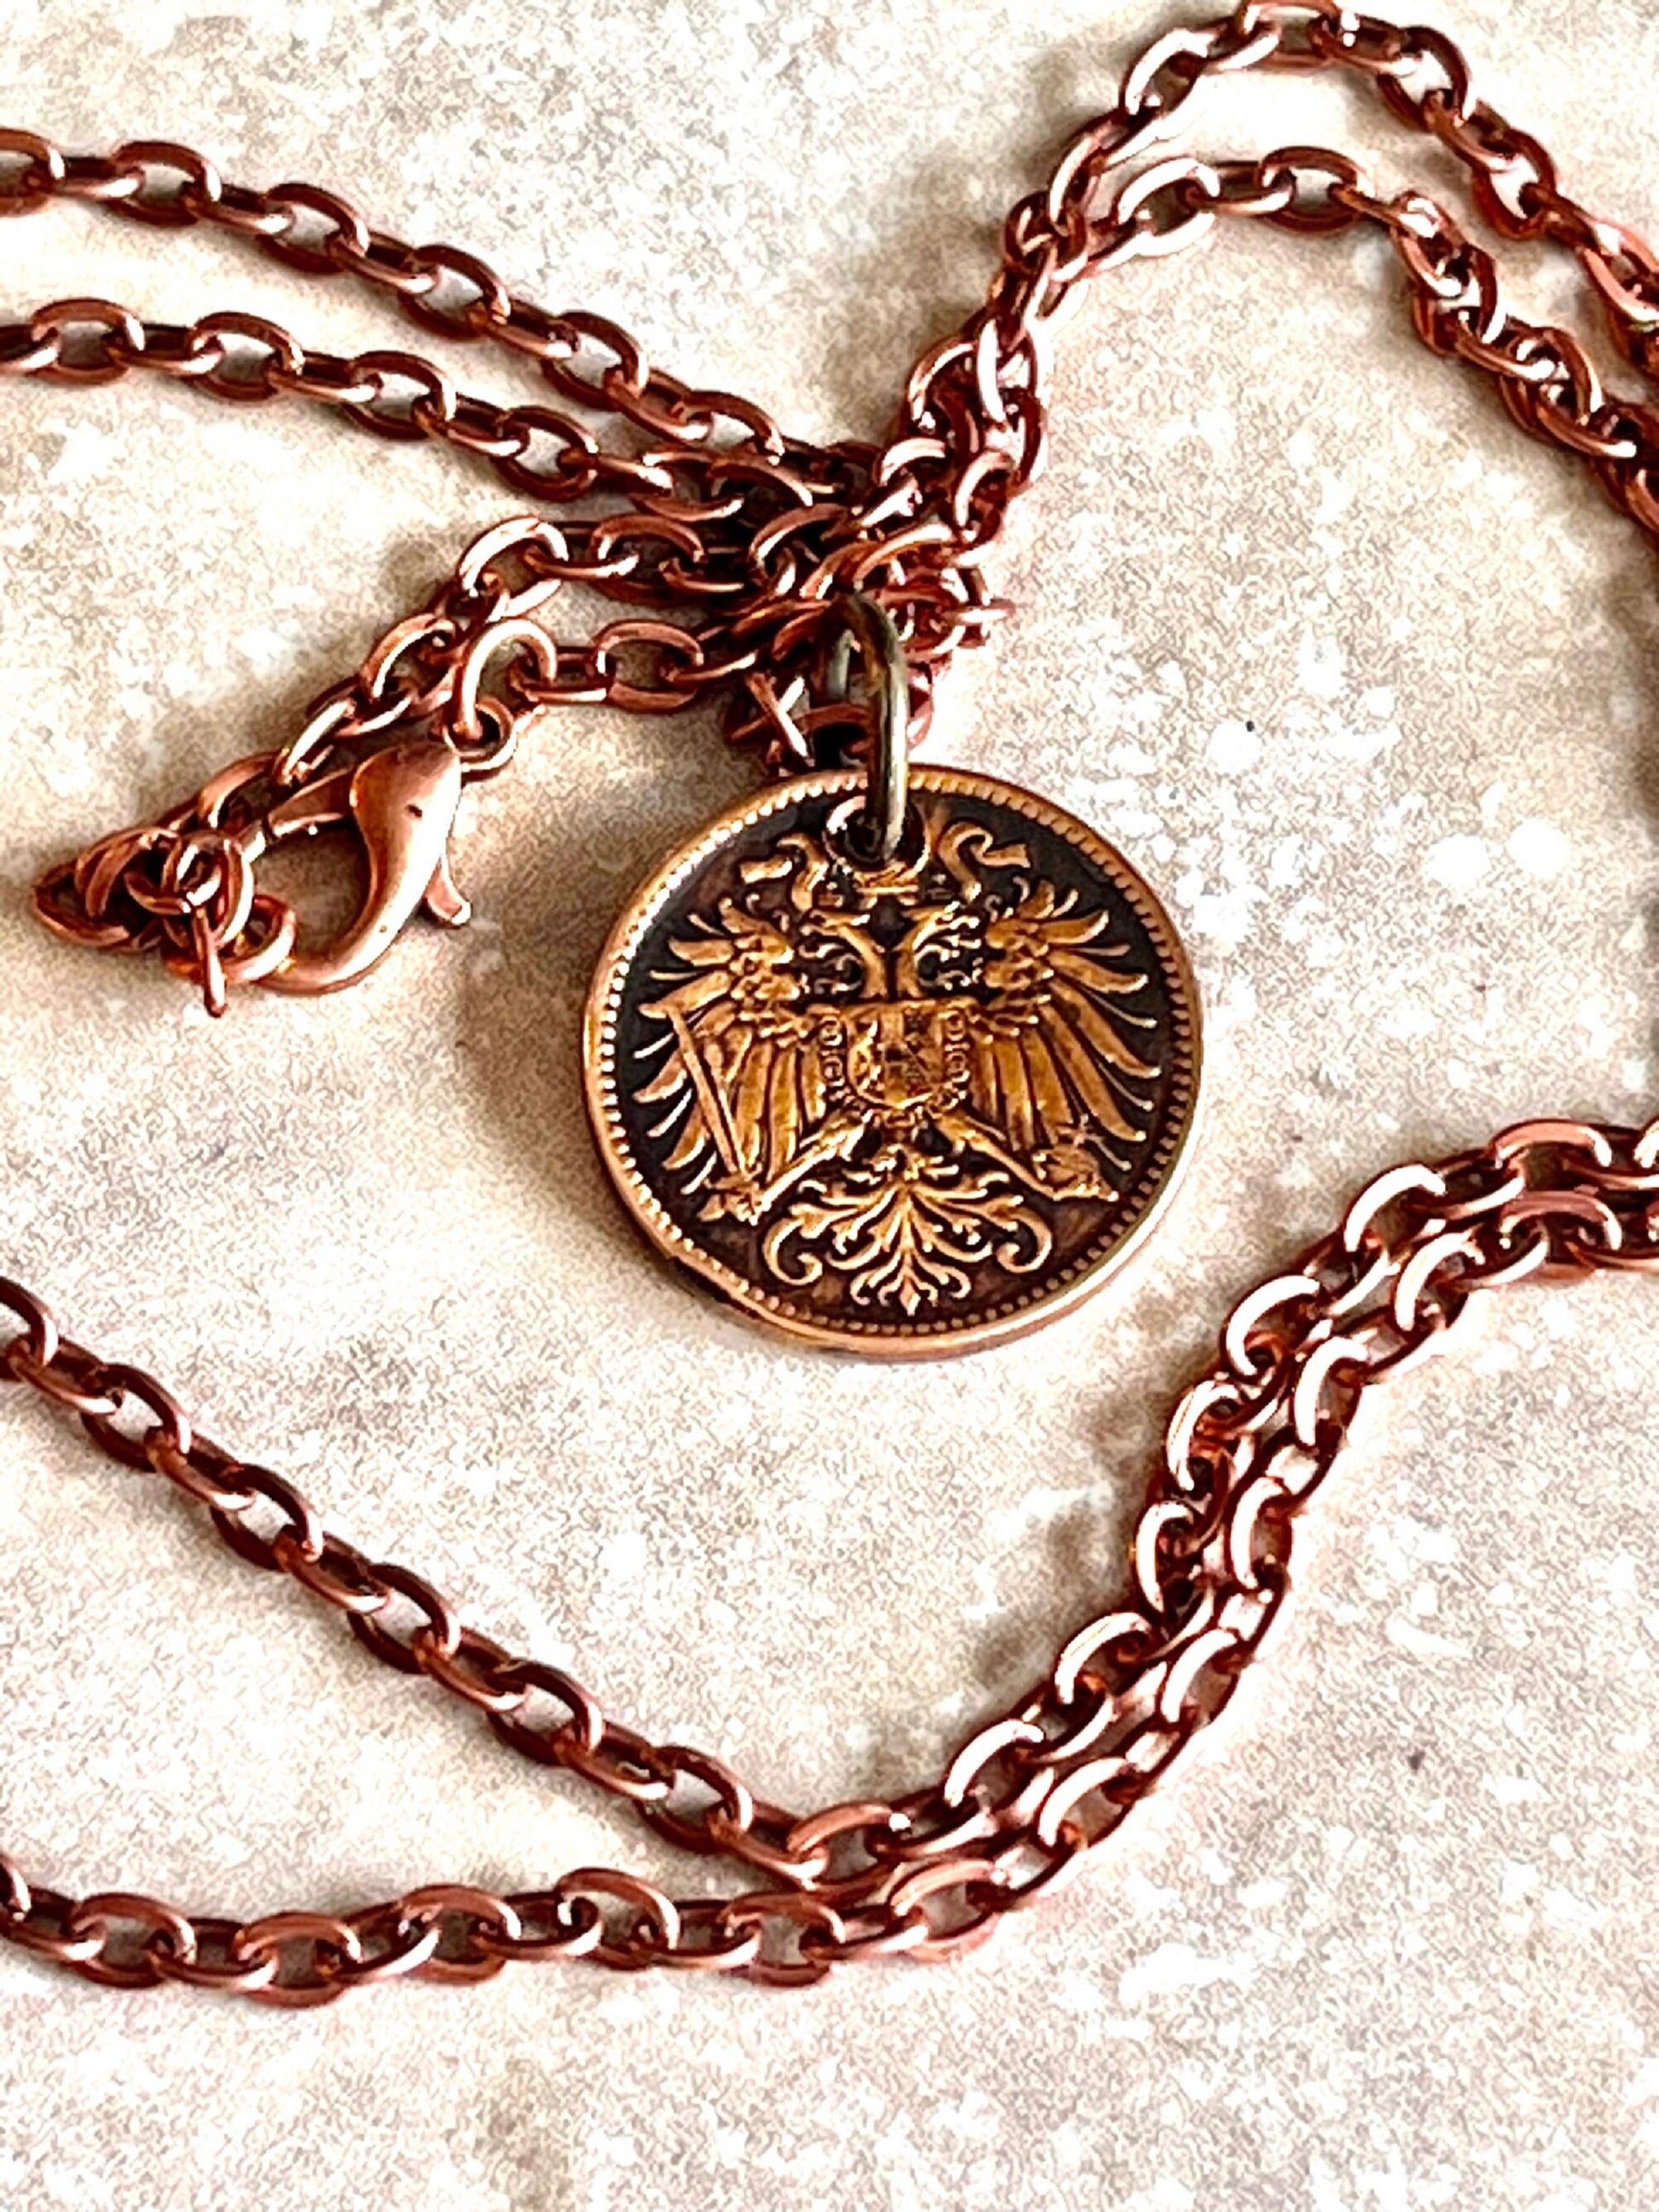 Austria Republic Austrian 2 Heller Personal Necklace Old Vintage Handmade Jewelry Gift Friend Charm For Him Her World Coin Collector